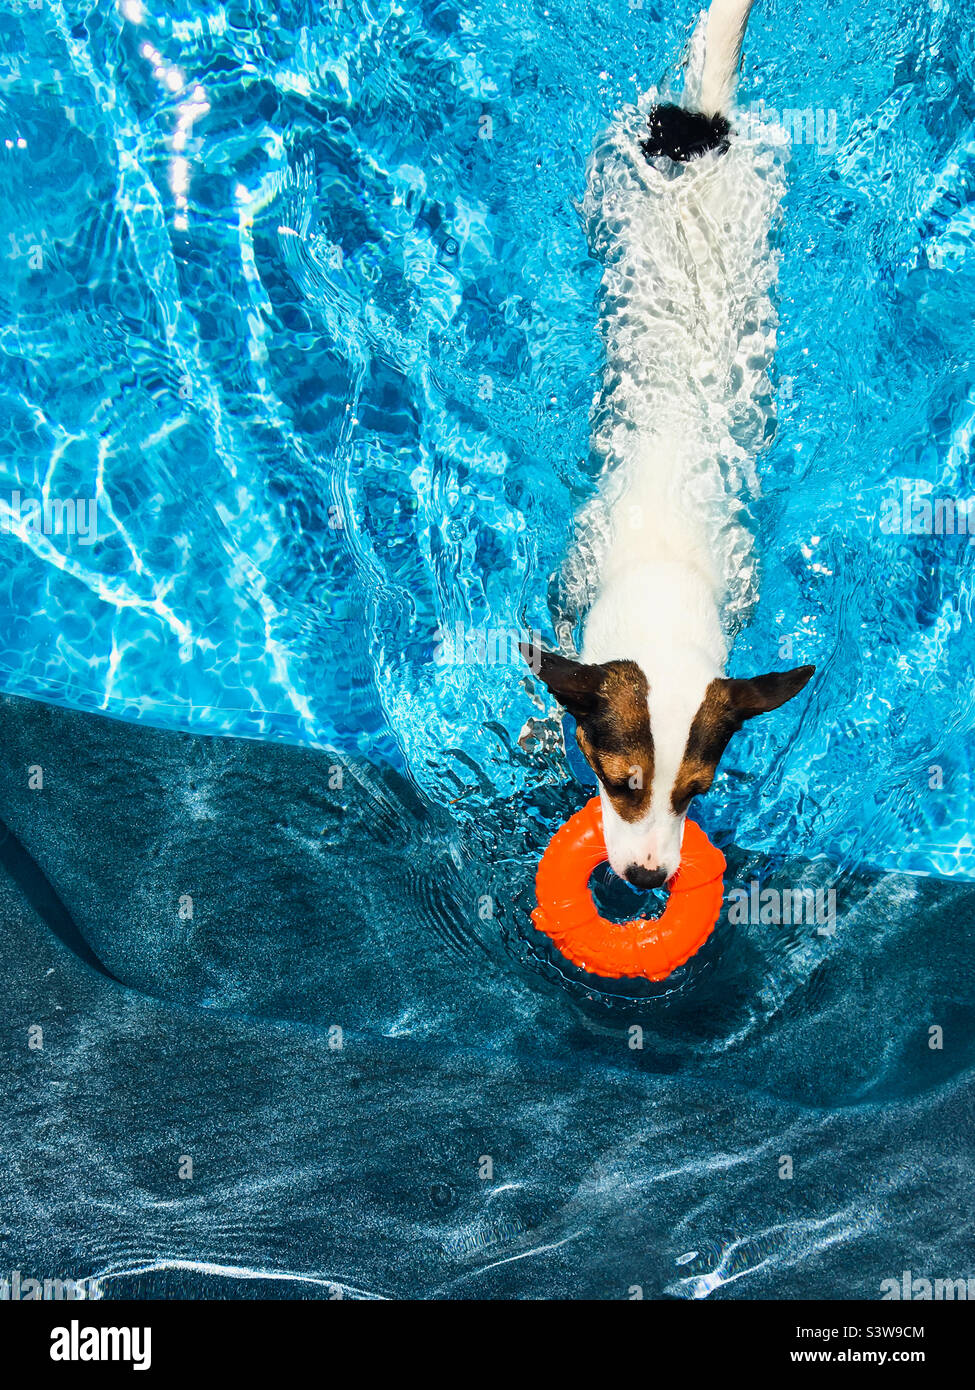 High angle view of a Jack Russell Terrier dog swimming in residential pool while carrying a toy in her mouth. Stock Photo